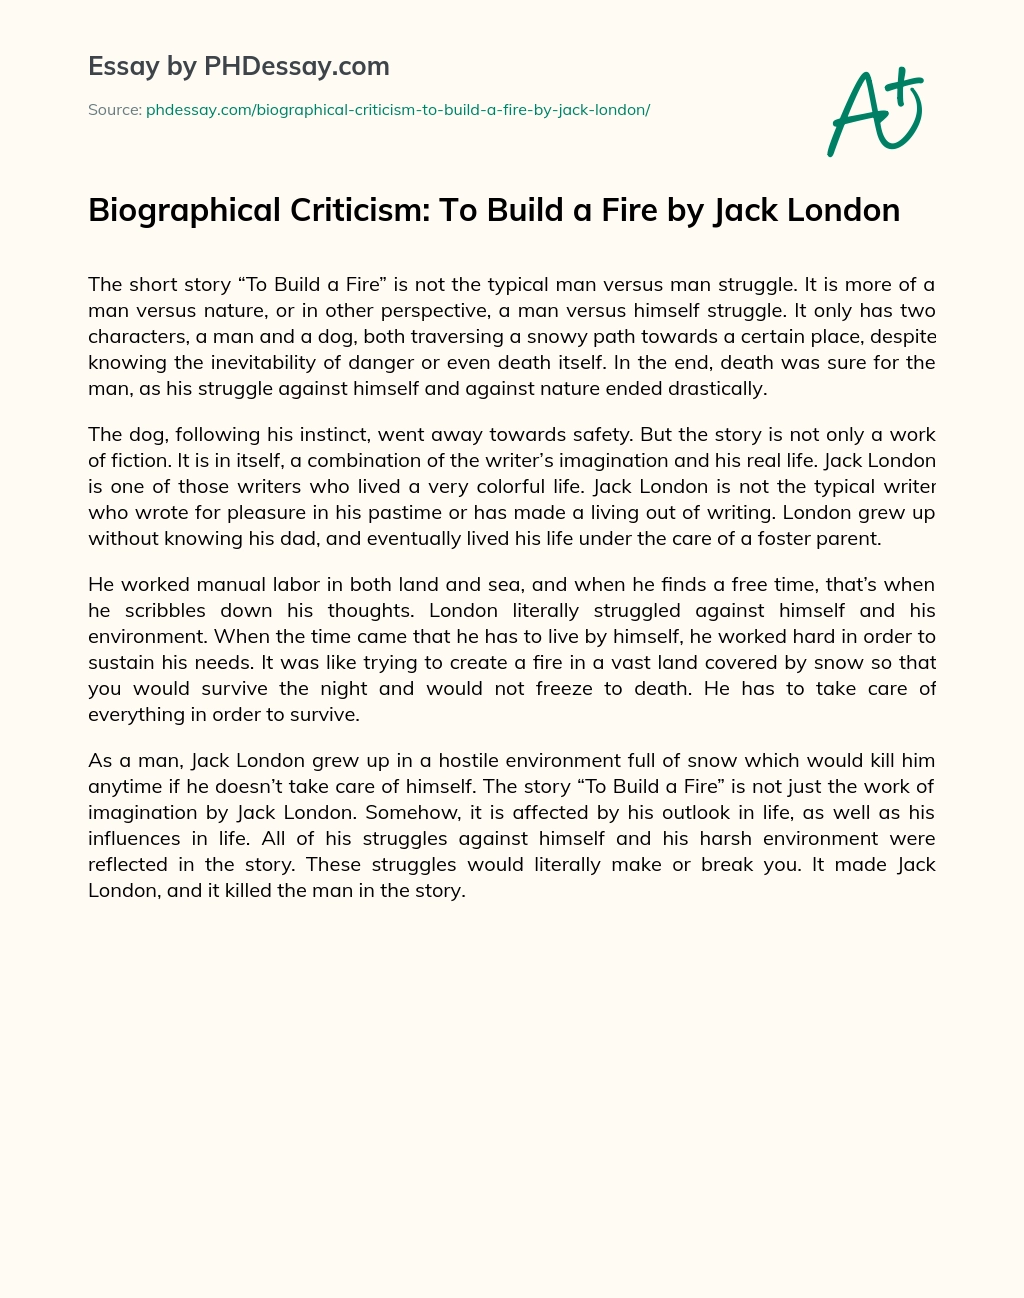 Biographical Criticism: To Build a Fire by Jack London essay